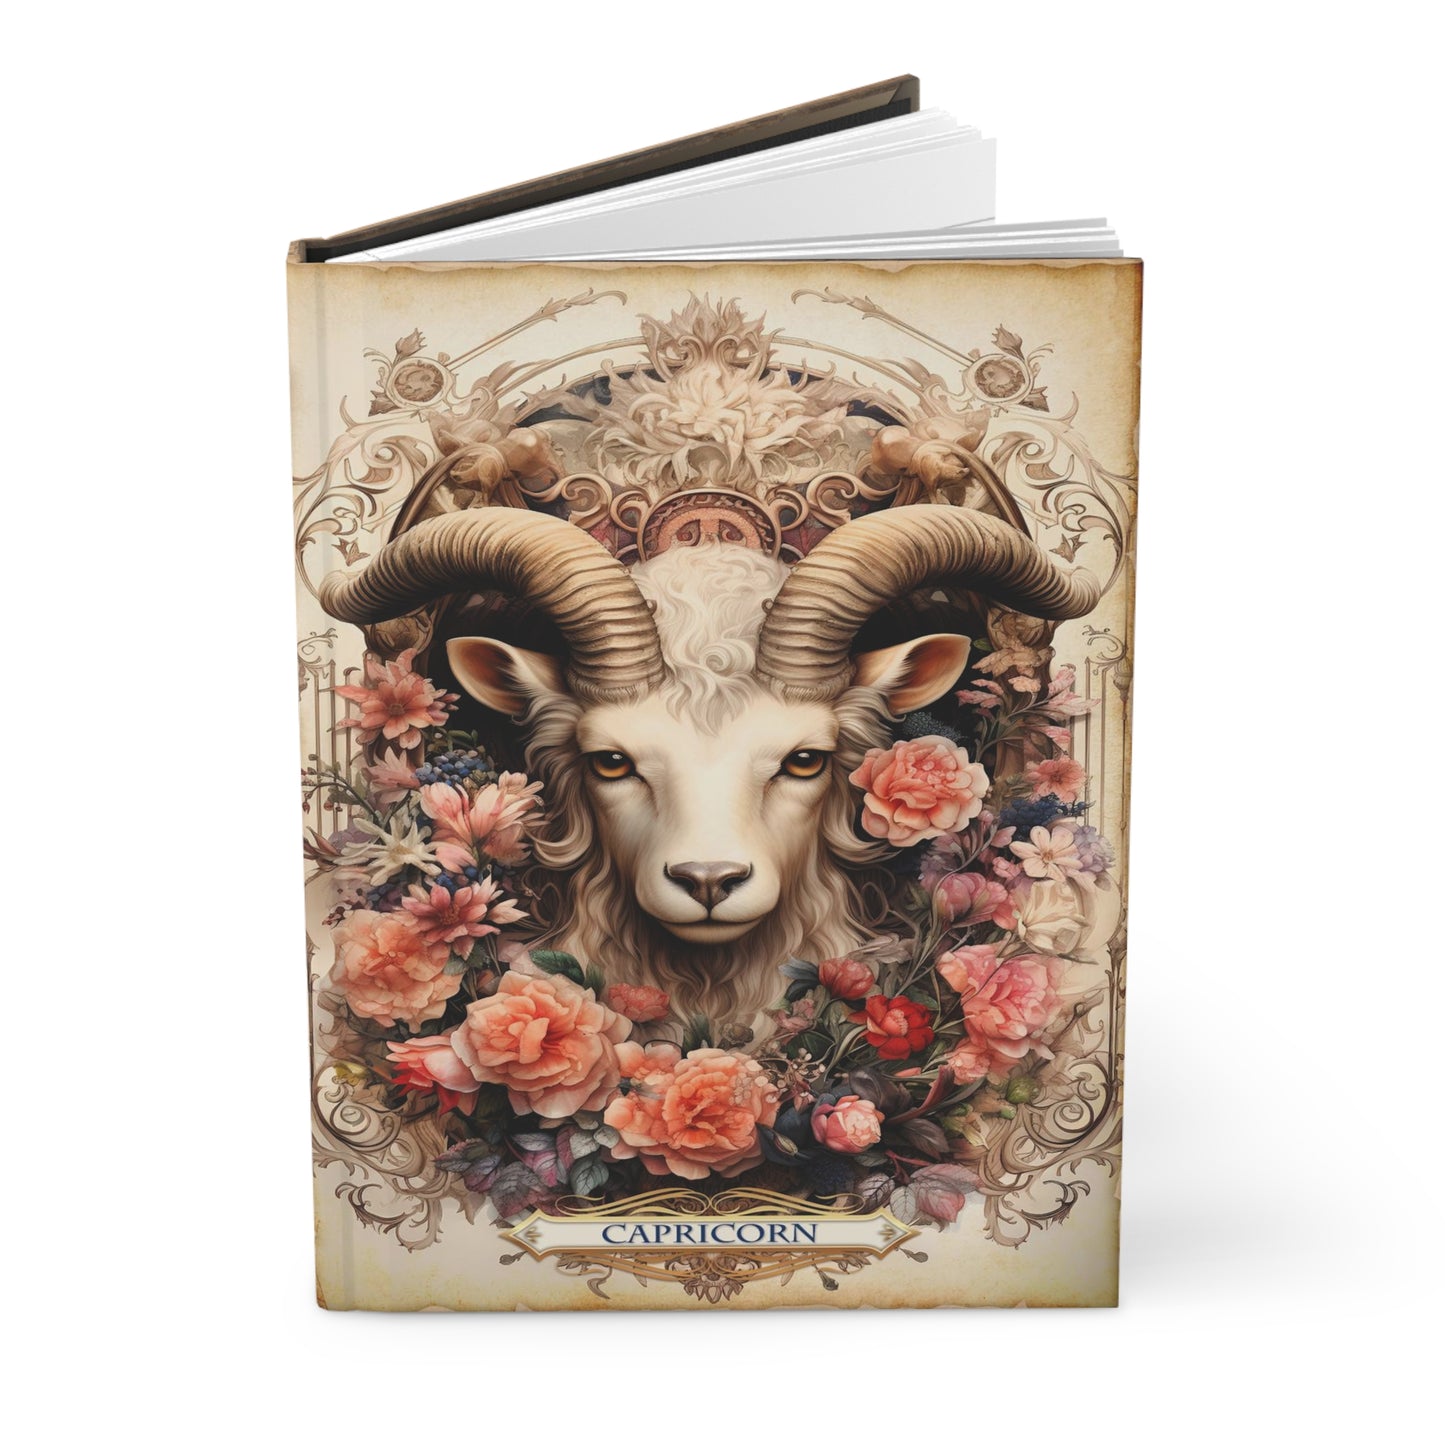 Capricorn - Floral Collection (Hardcover Journal Matte)